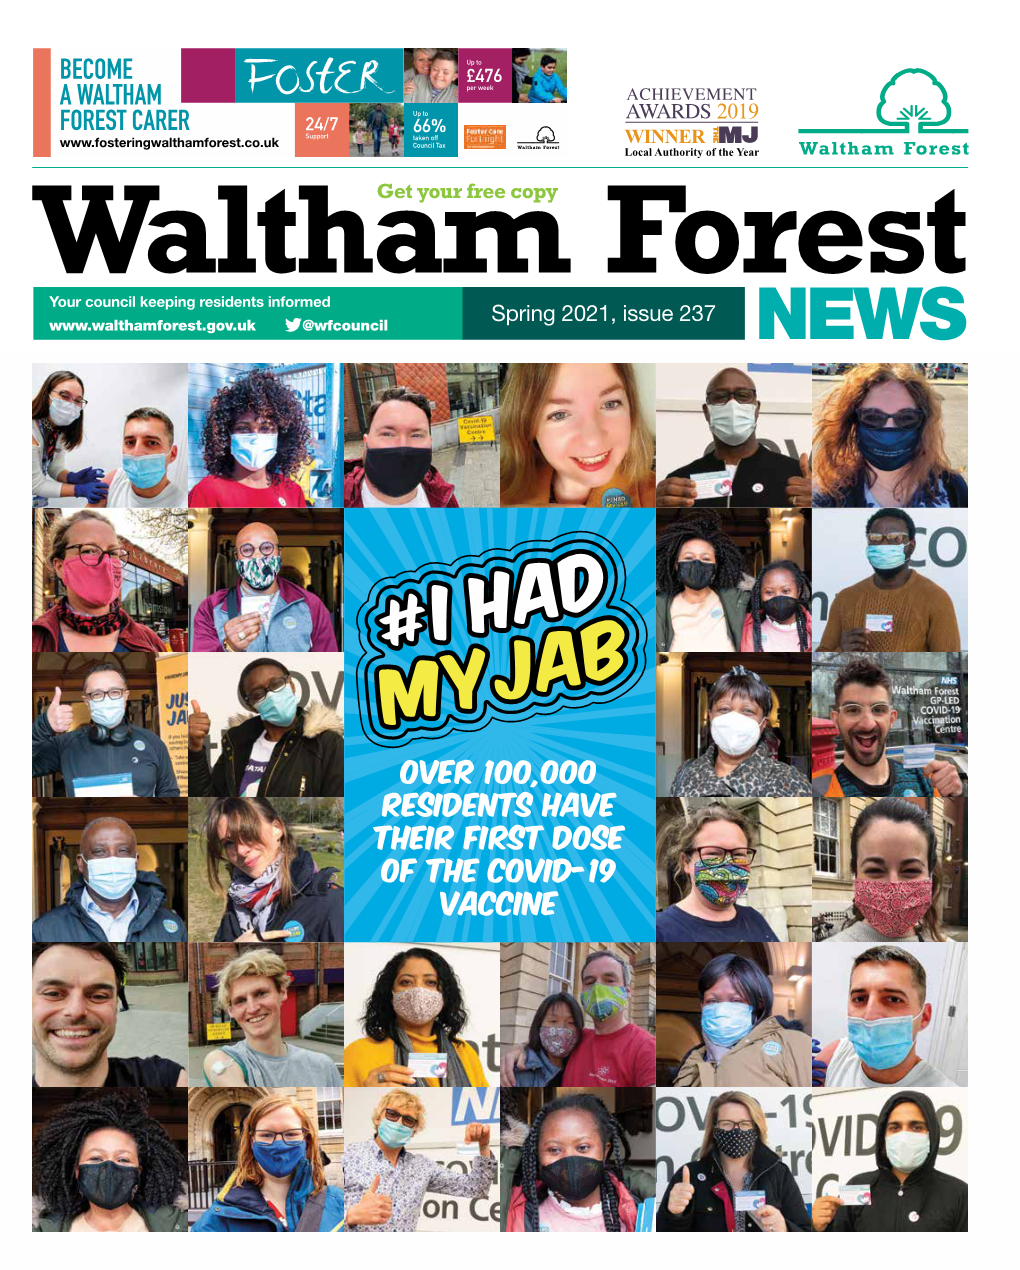 Become a Waltham Forest Carer